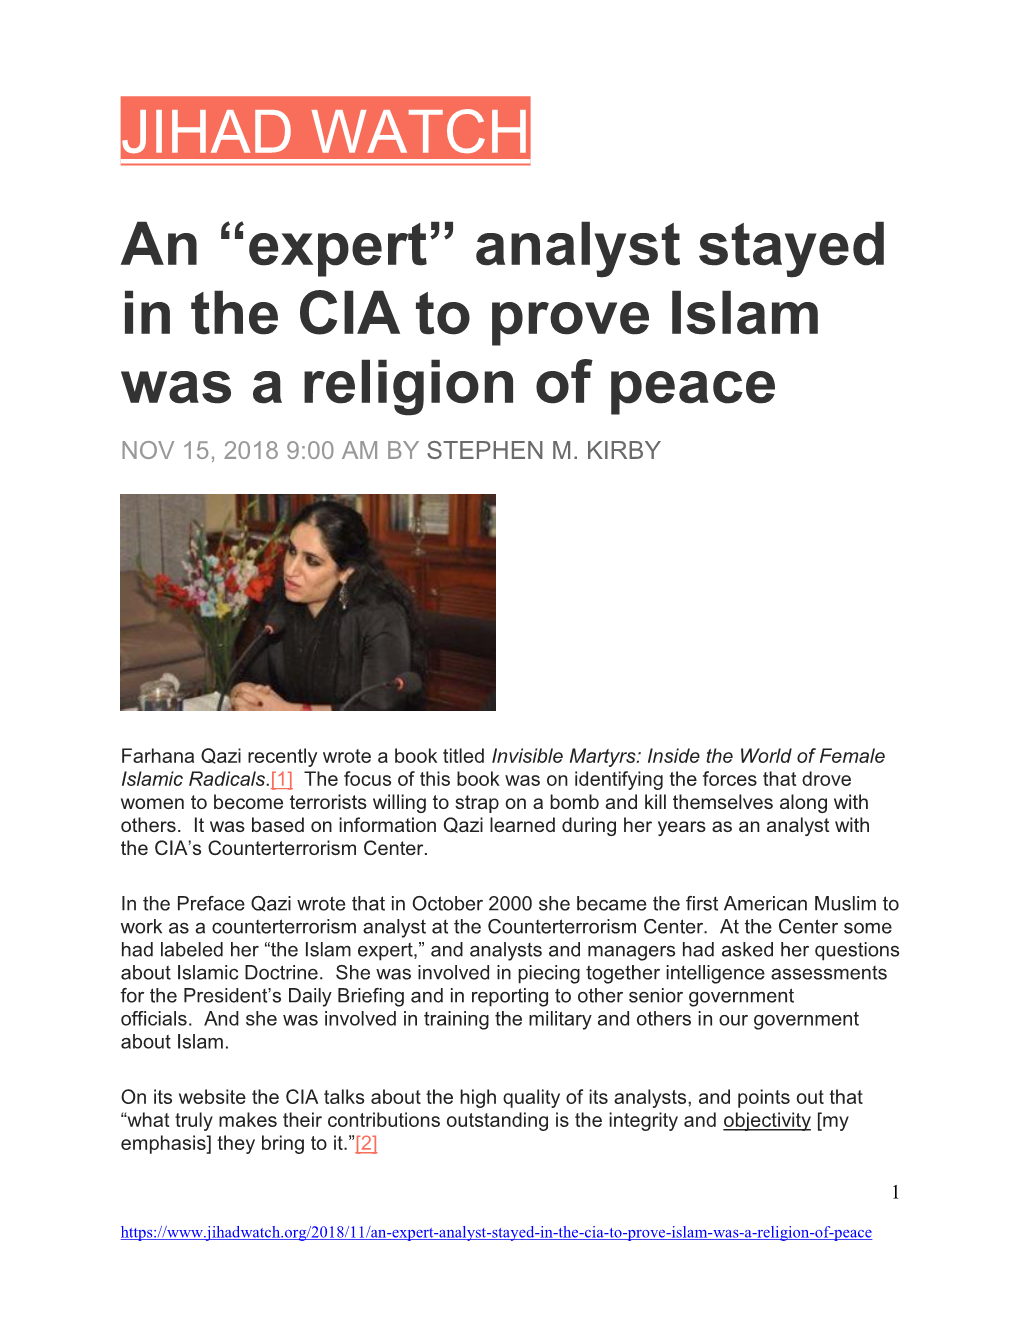 JIHAD WATCH an “Expert” Analyst Stayed in the CIA to Prove Islam